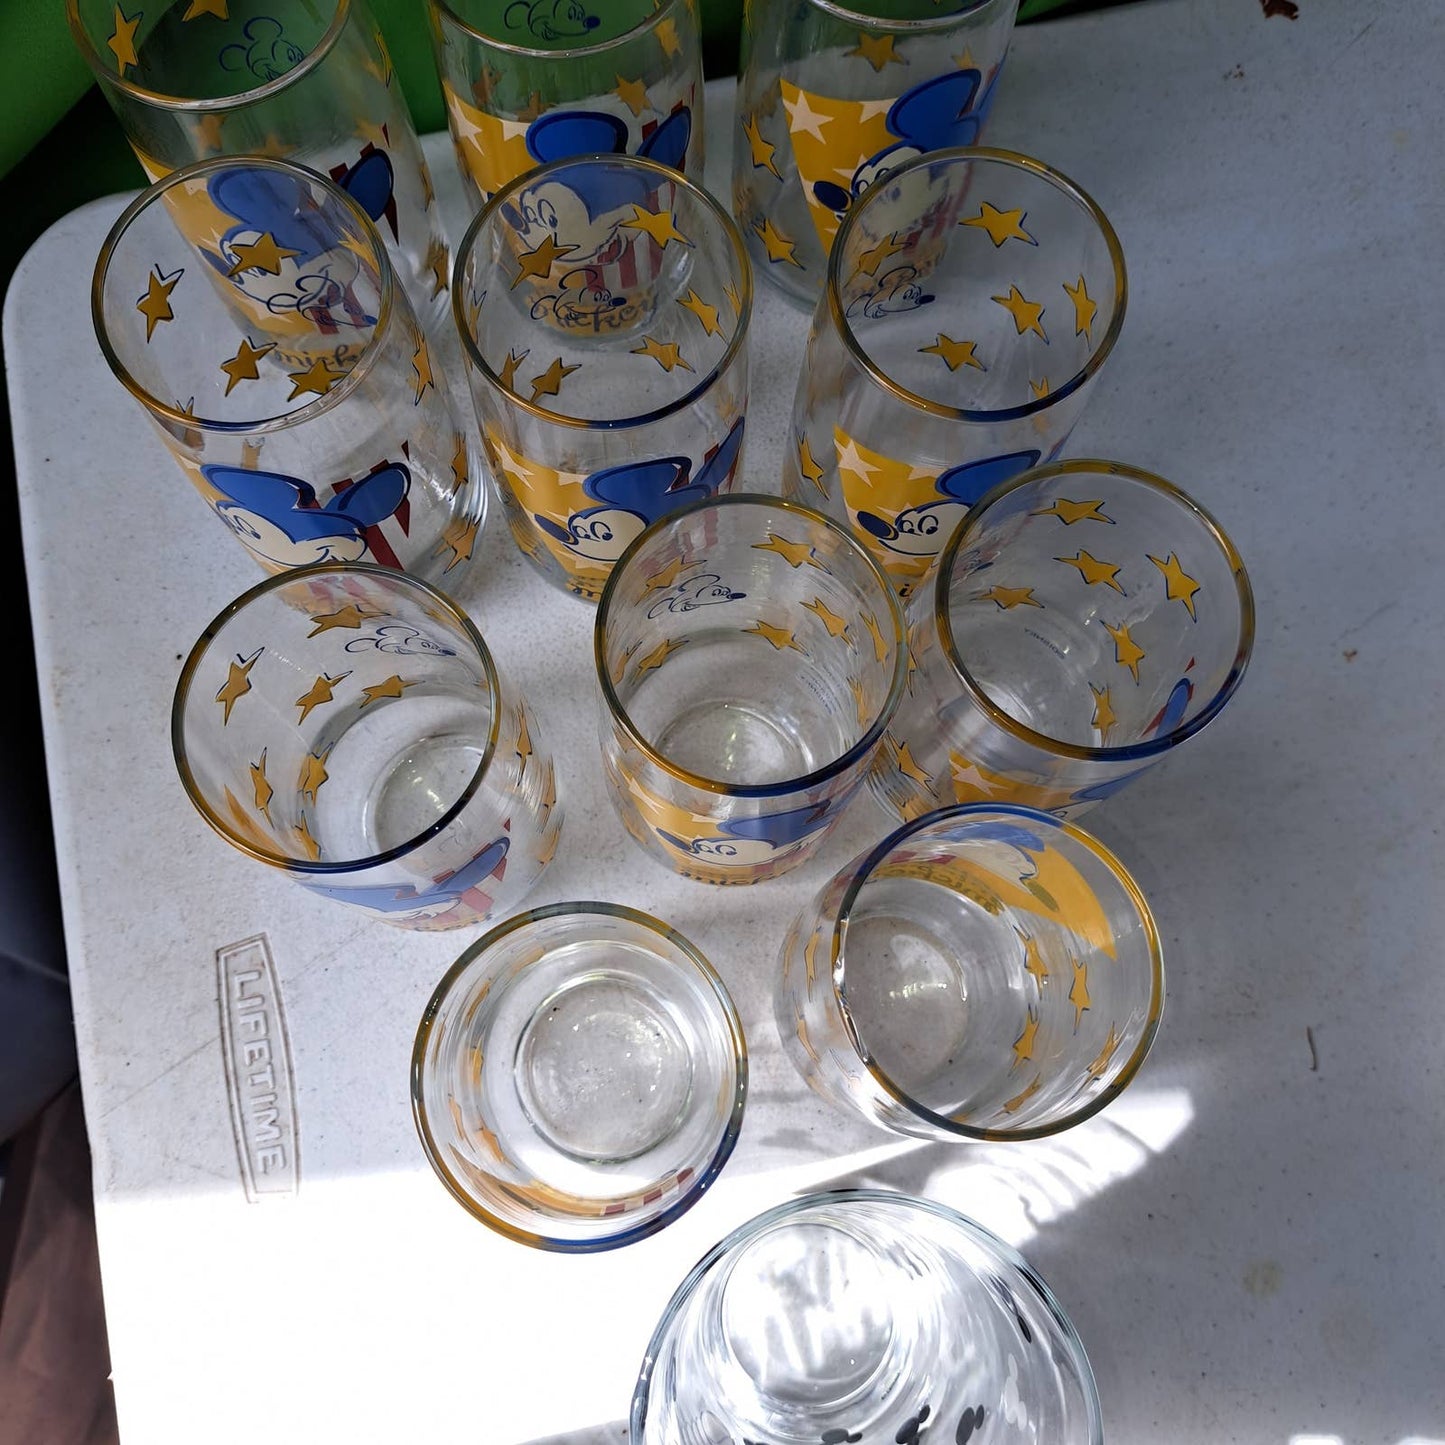 Very Vintage and FUN Disney Glass Set of 12 Tall Glasses